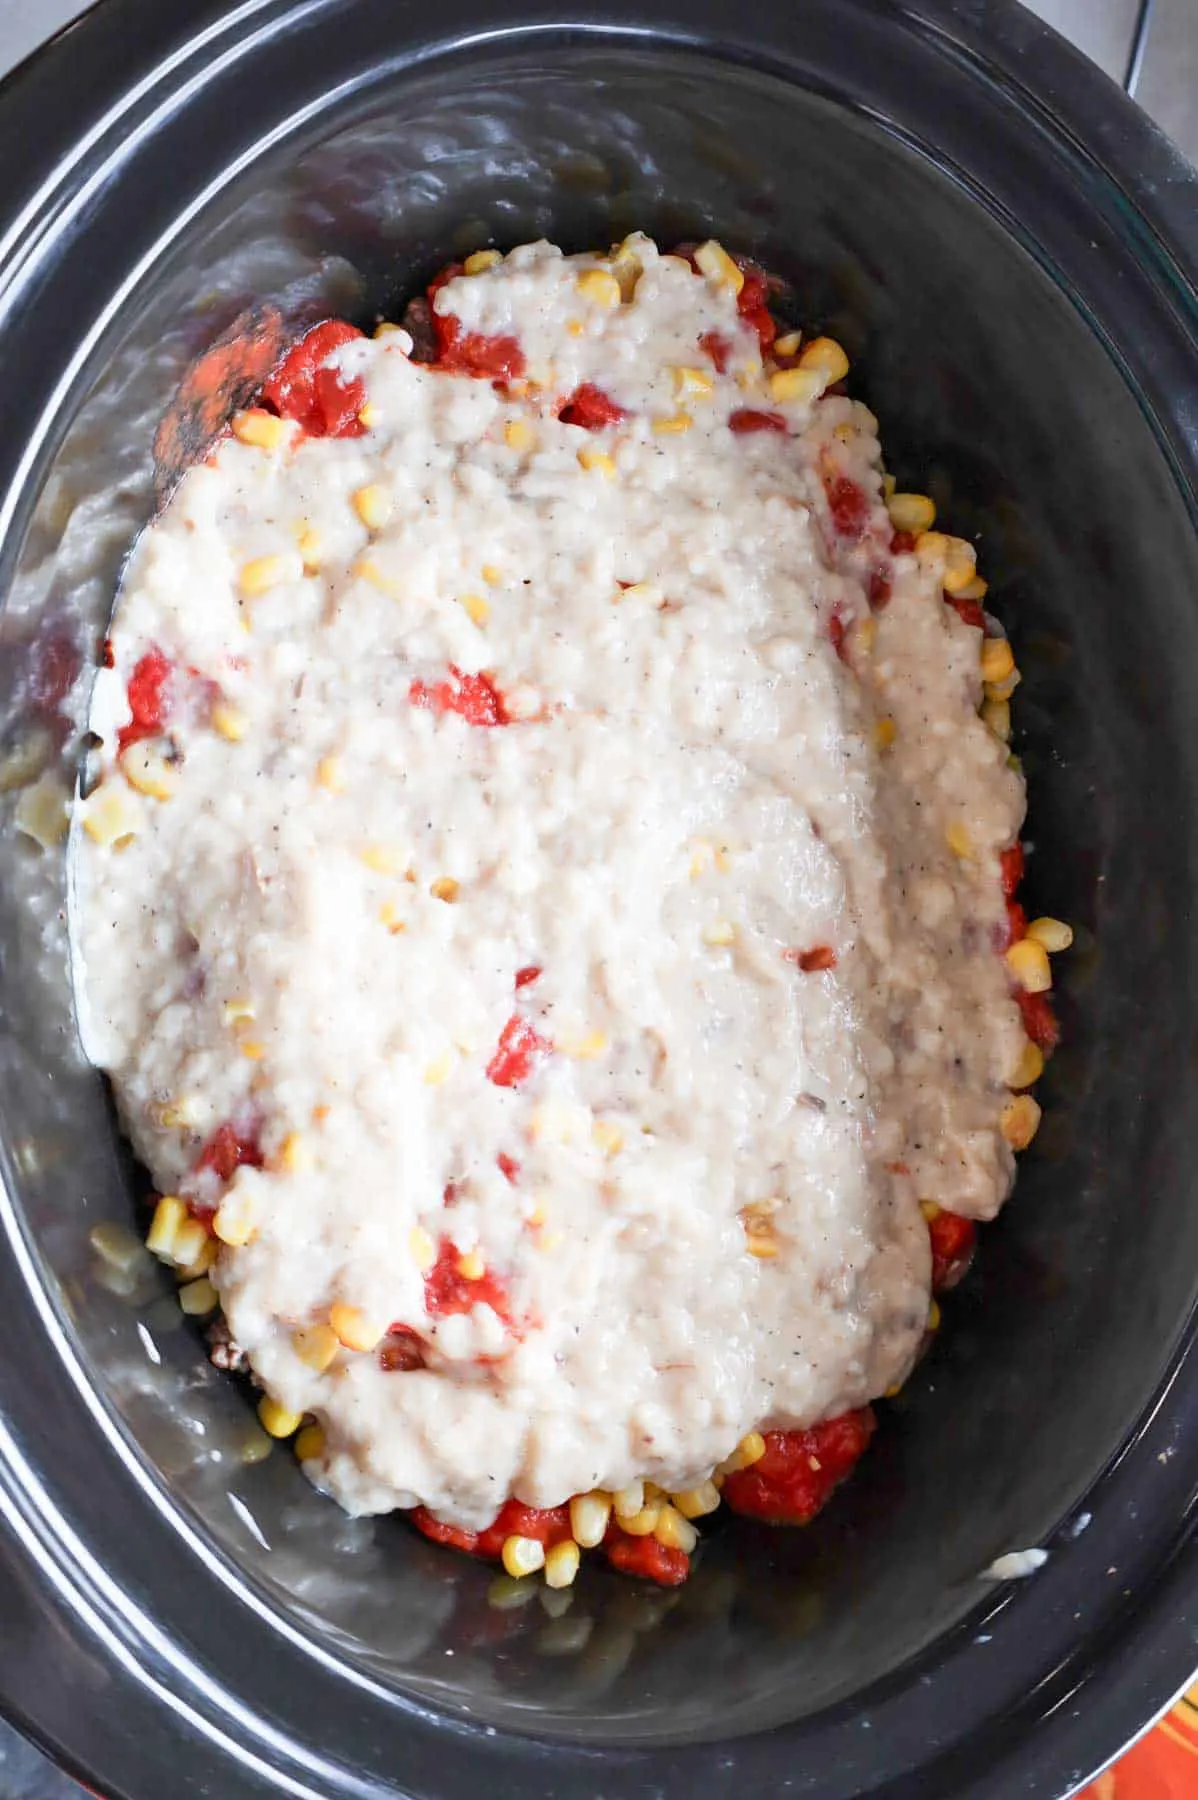 cream of mushroom soup mixture poured over diced tomatoes, corn and ground beef in a slow cooker